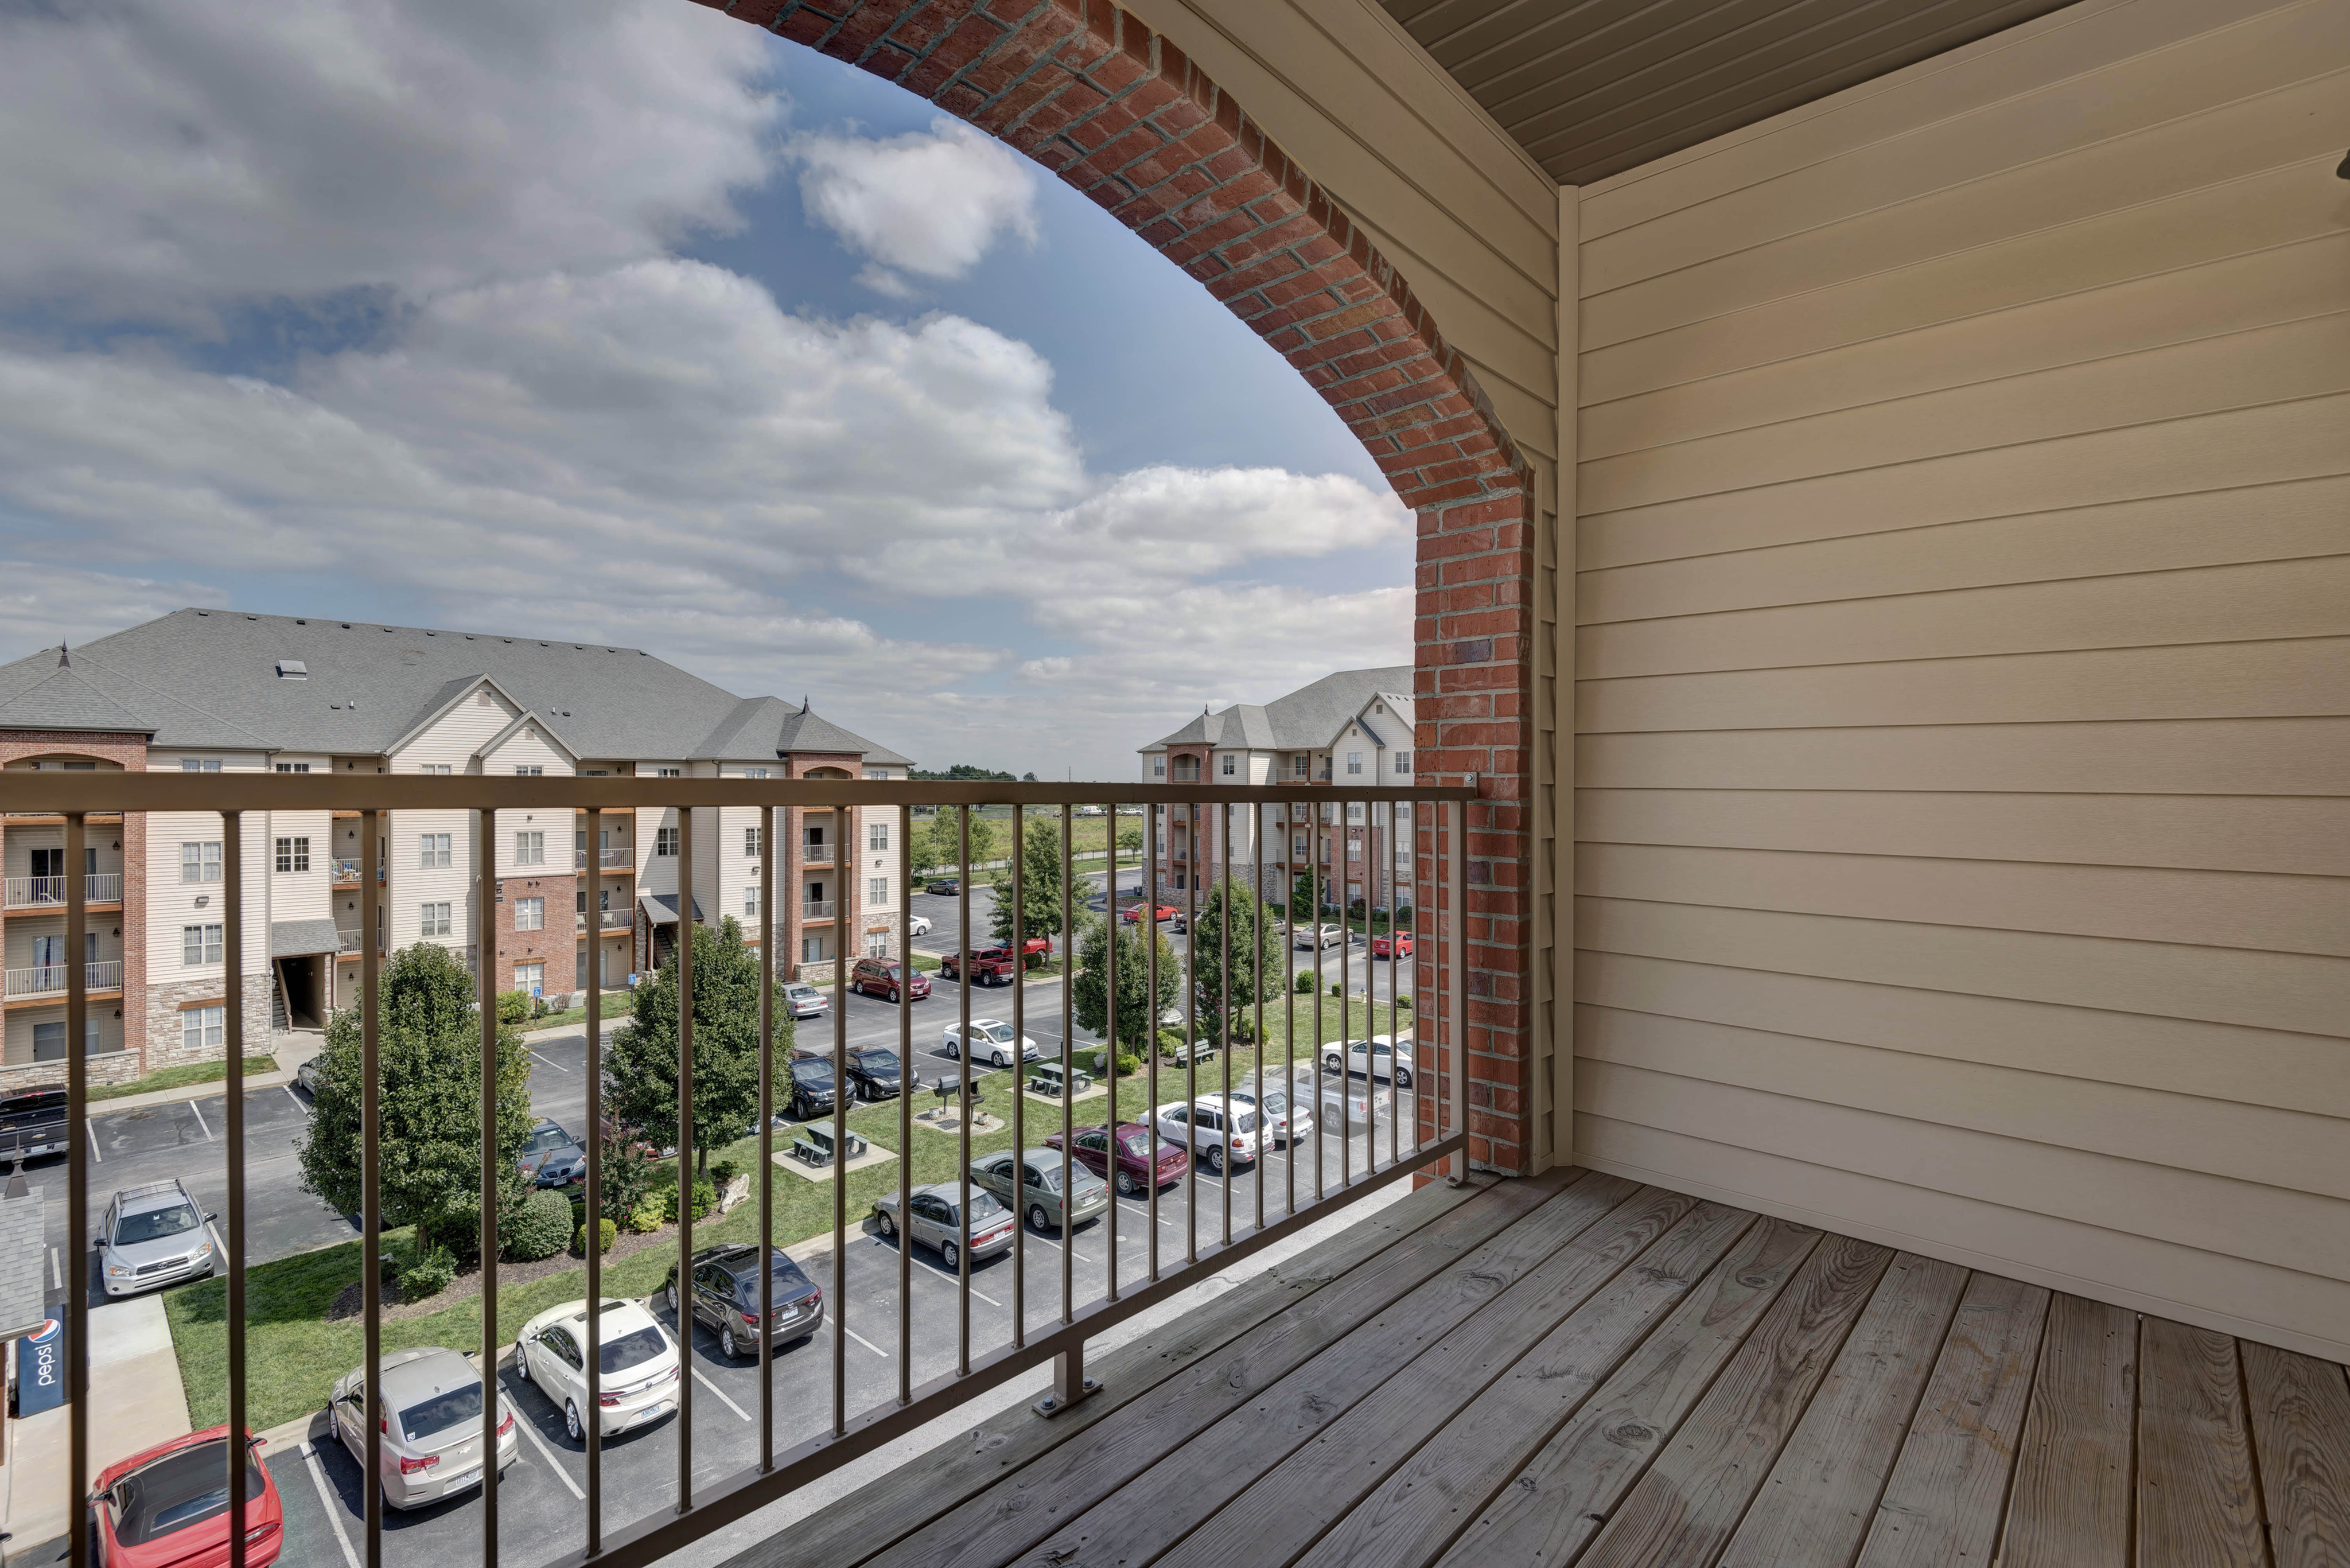 Coryell Courts balcony overlooking the apartment community